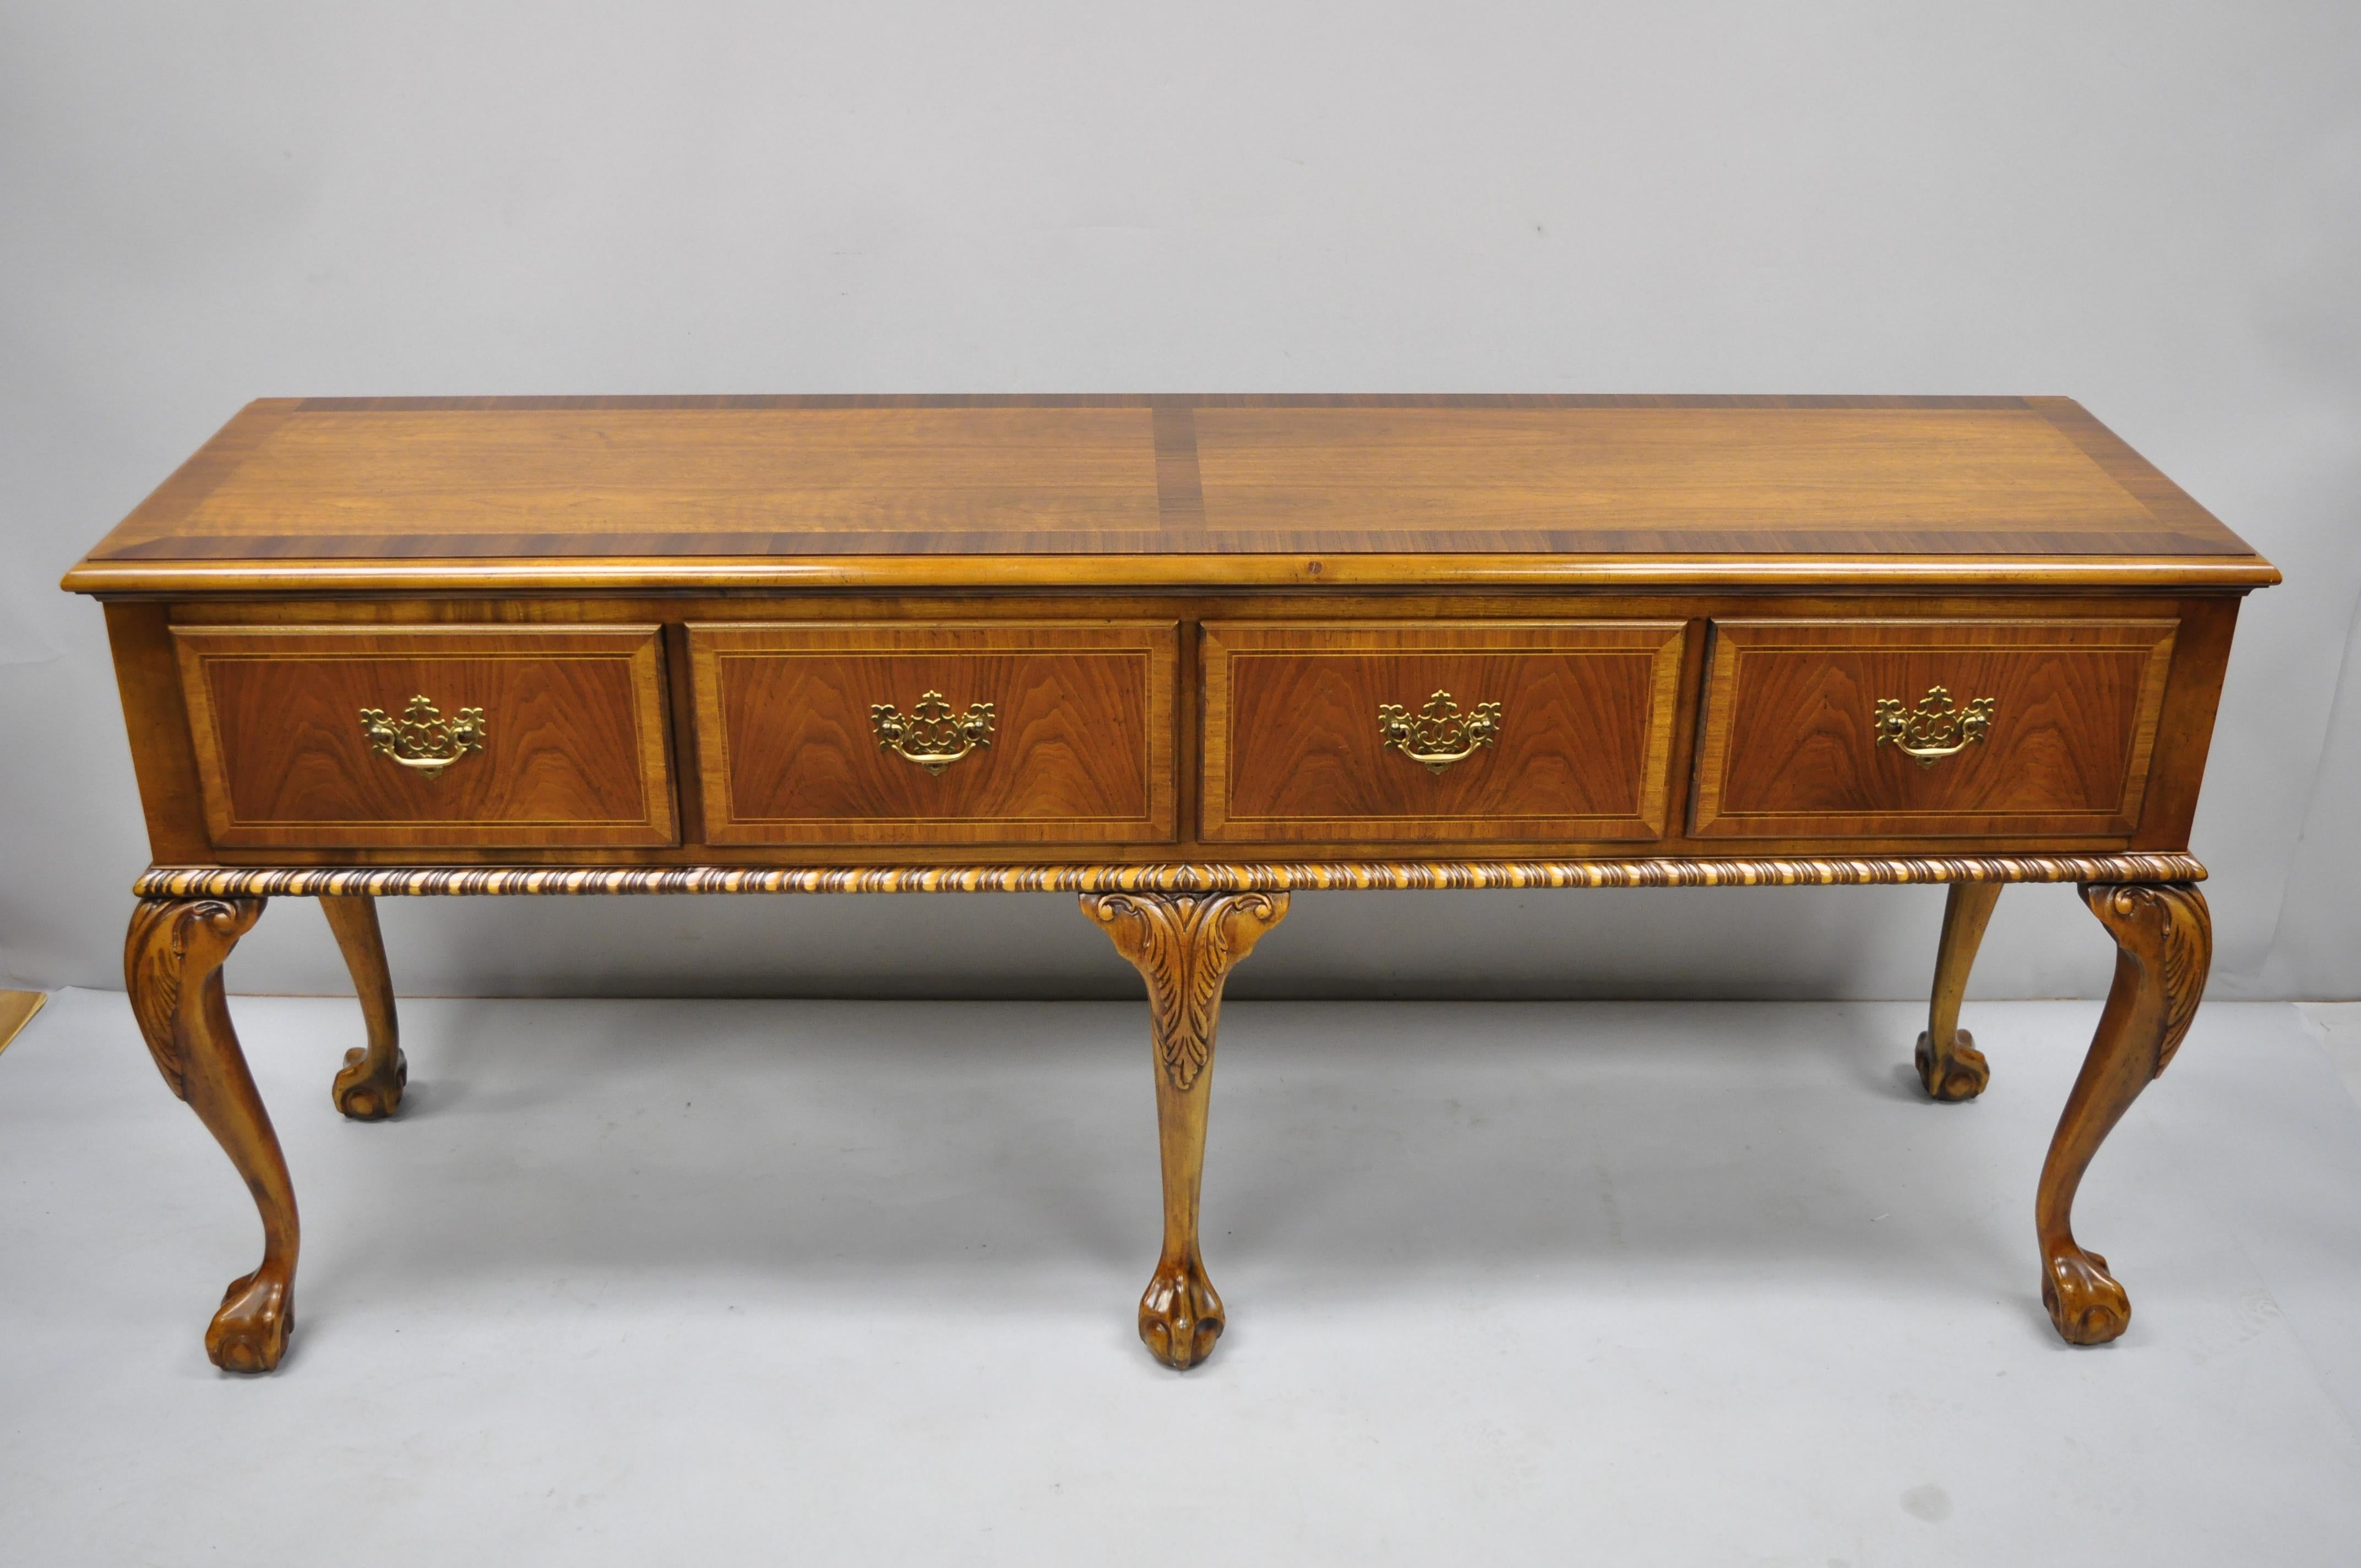 Baker 4-drawer ball and claw Chippendale mahogany banded sideboard buffet. Item features carved ball and claw feet, banded top and drawer fronts, custom glass top, beautiful wood grain, original label, 4 dovetail drawer, very nice vintage item,